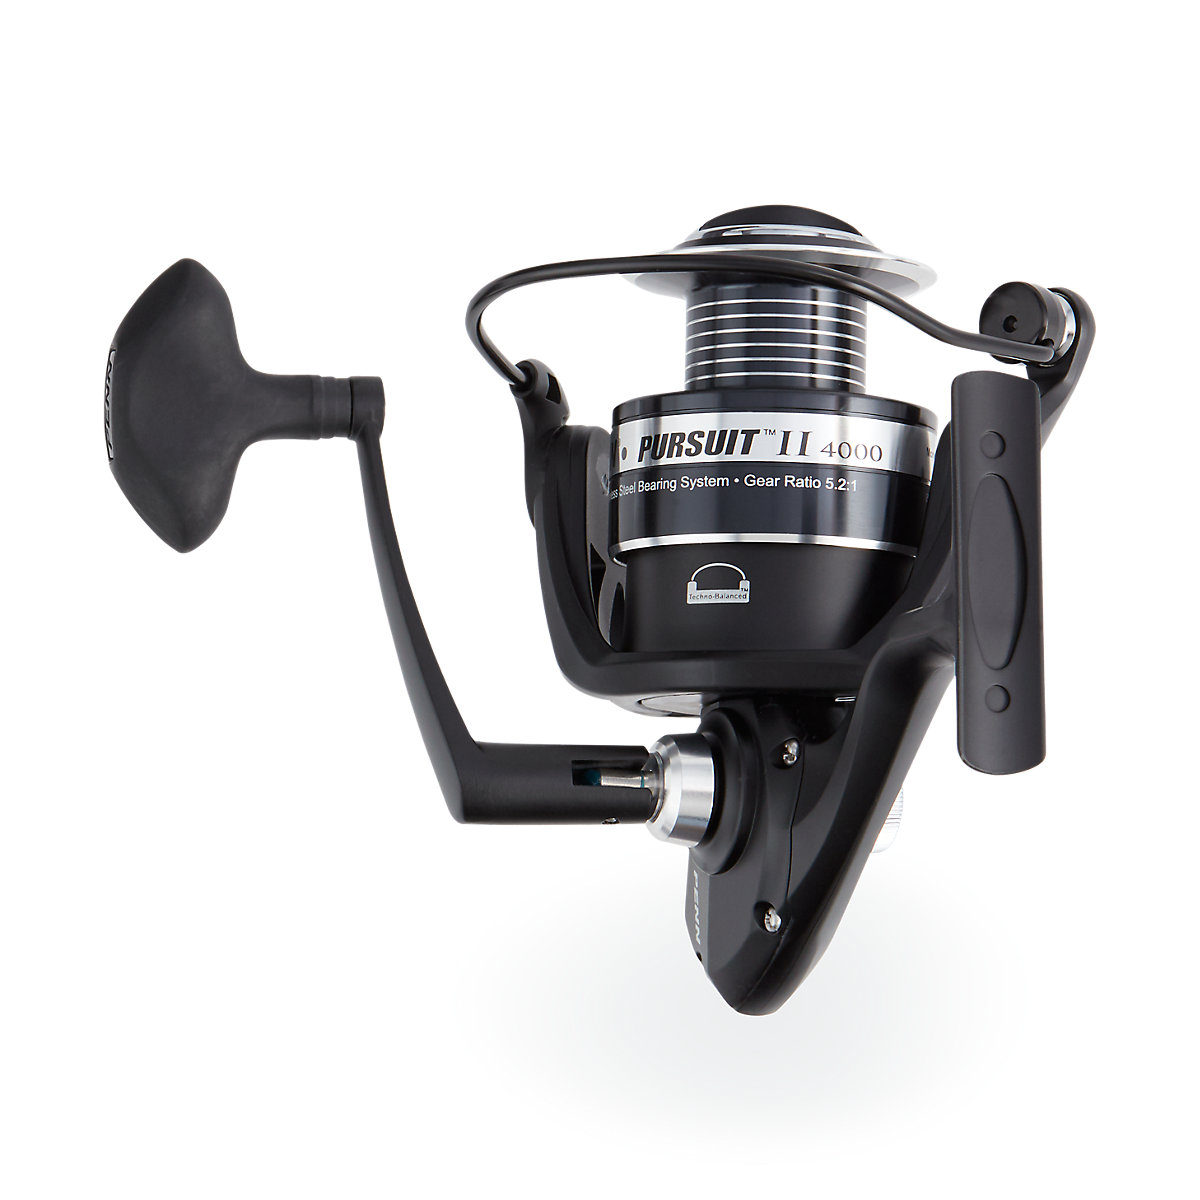 Penn Pursuit II Spin Reel 4000 Boxed 1292958 - image 3 of 6